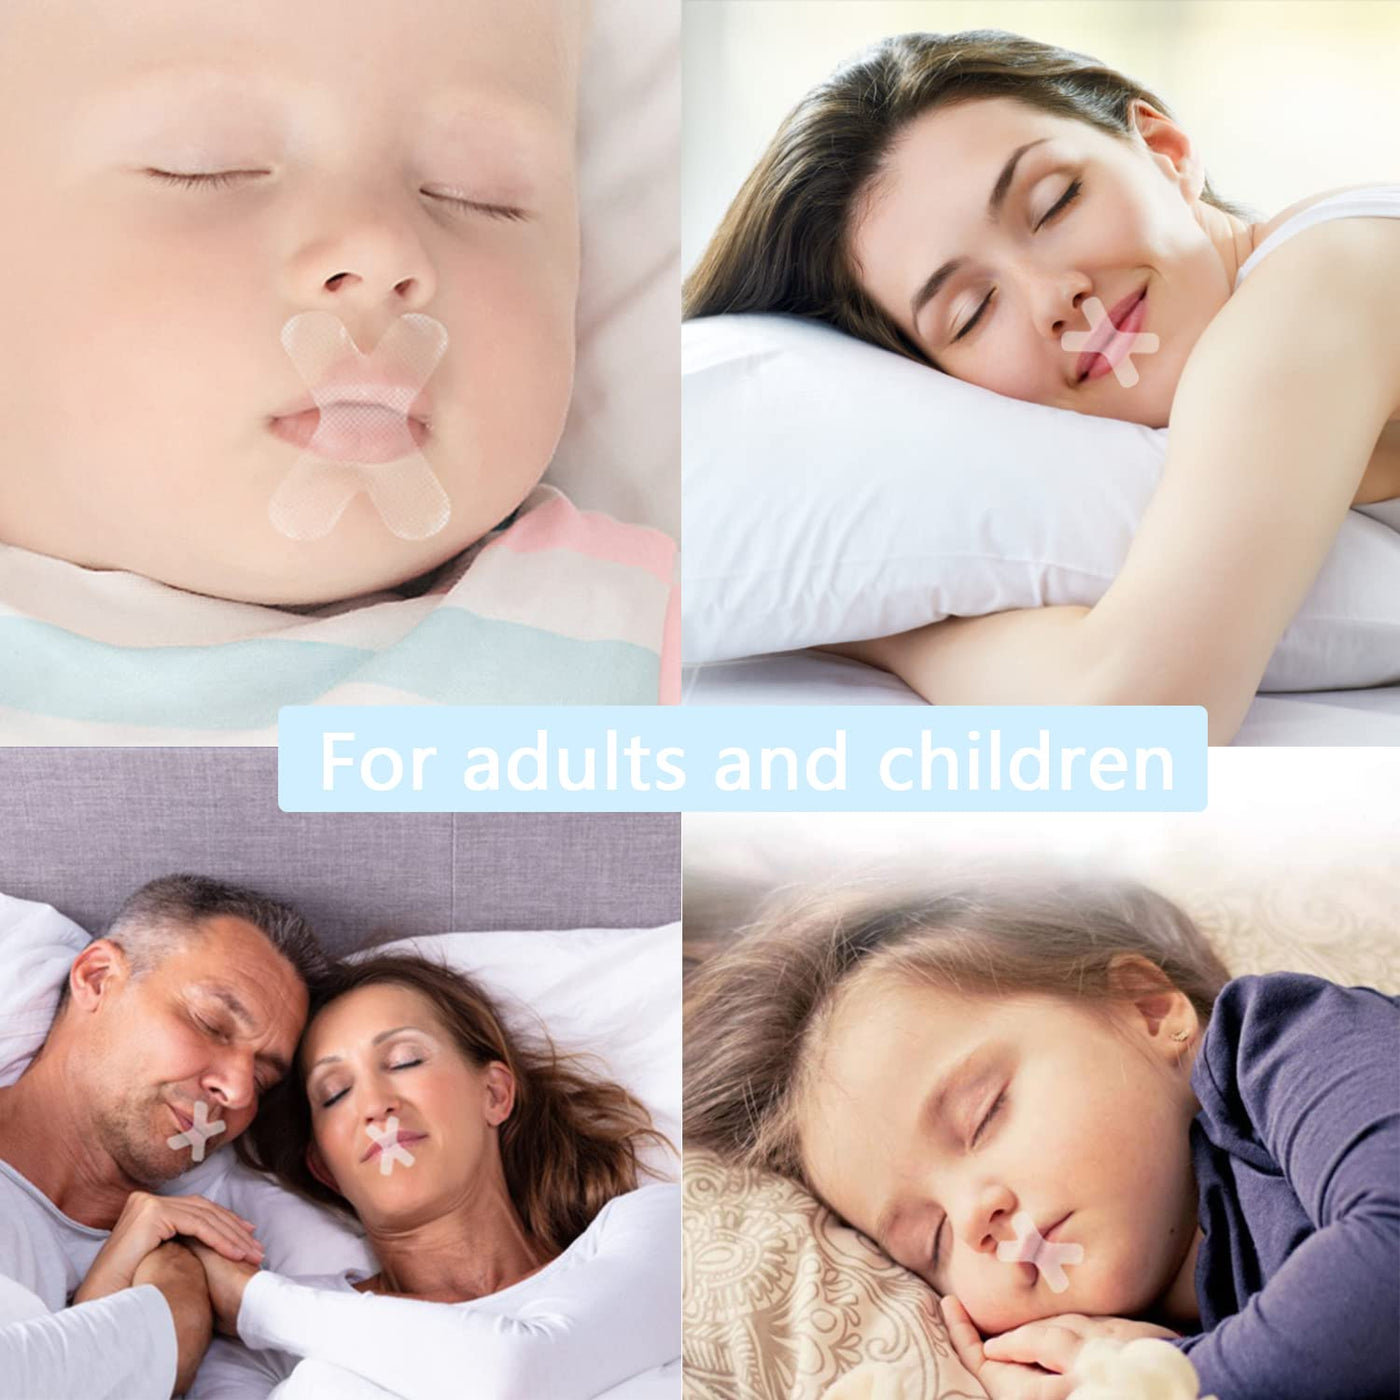 Gentle Sleep Tape Mouth Sleep Strips for Nose Breathing Nighttime